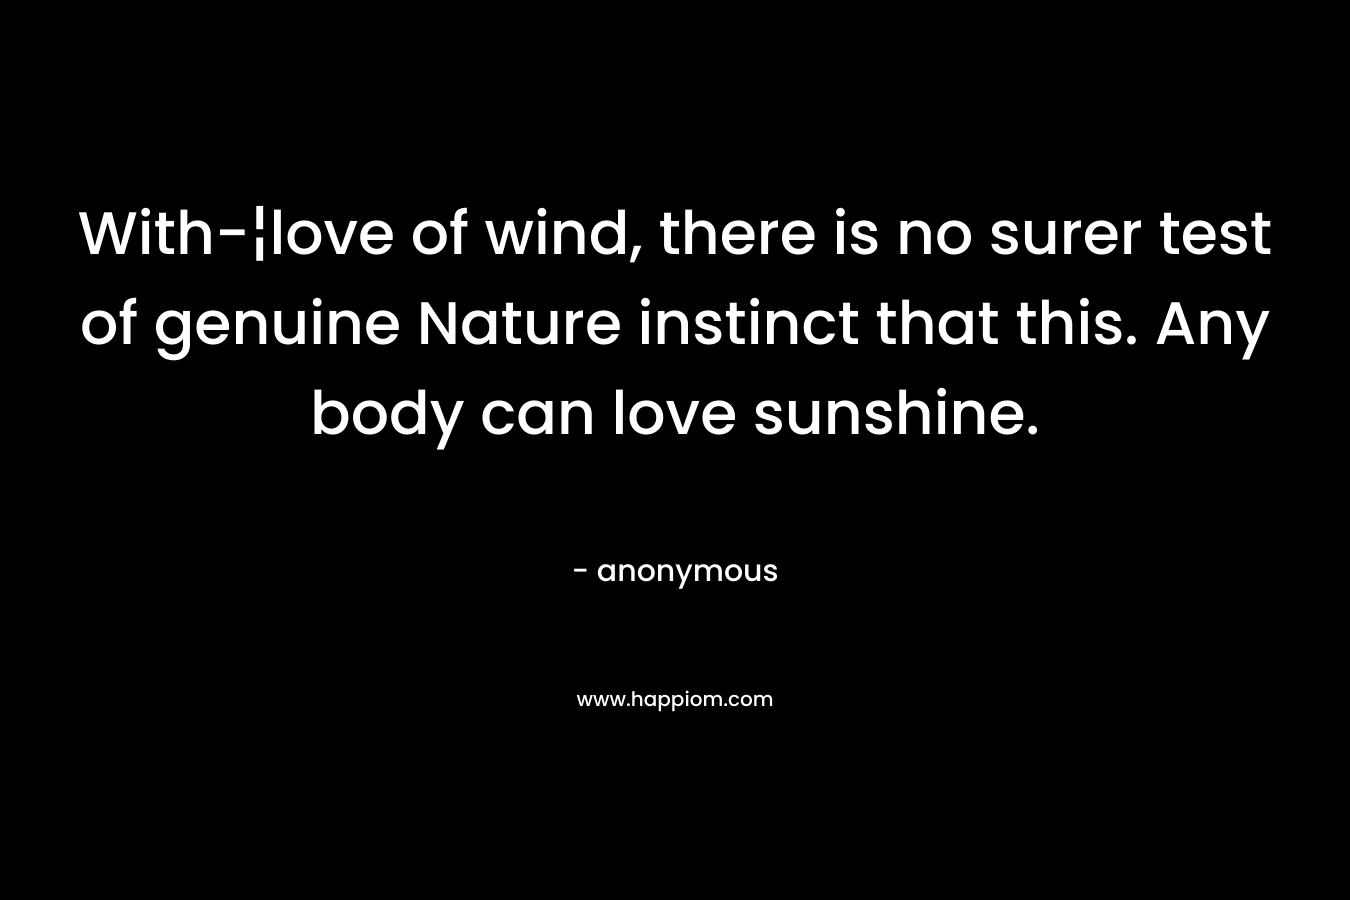 With-¦love of wind, there is no surer test of genuine Nature instinct that this. Any body can love sunshine. – anonymous